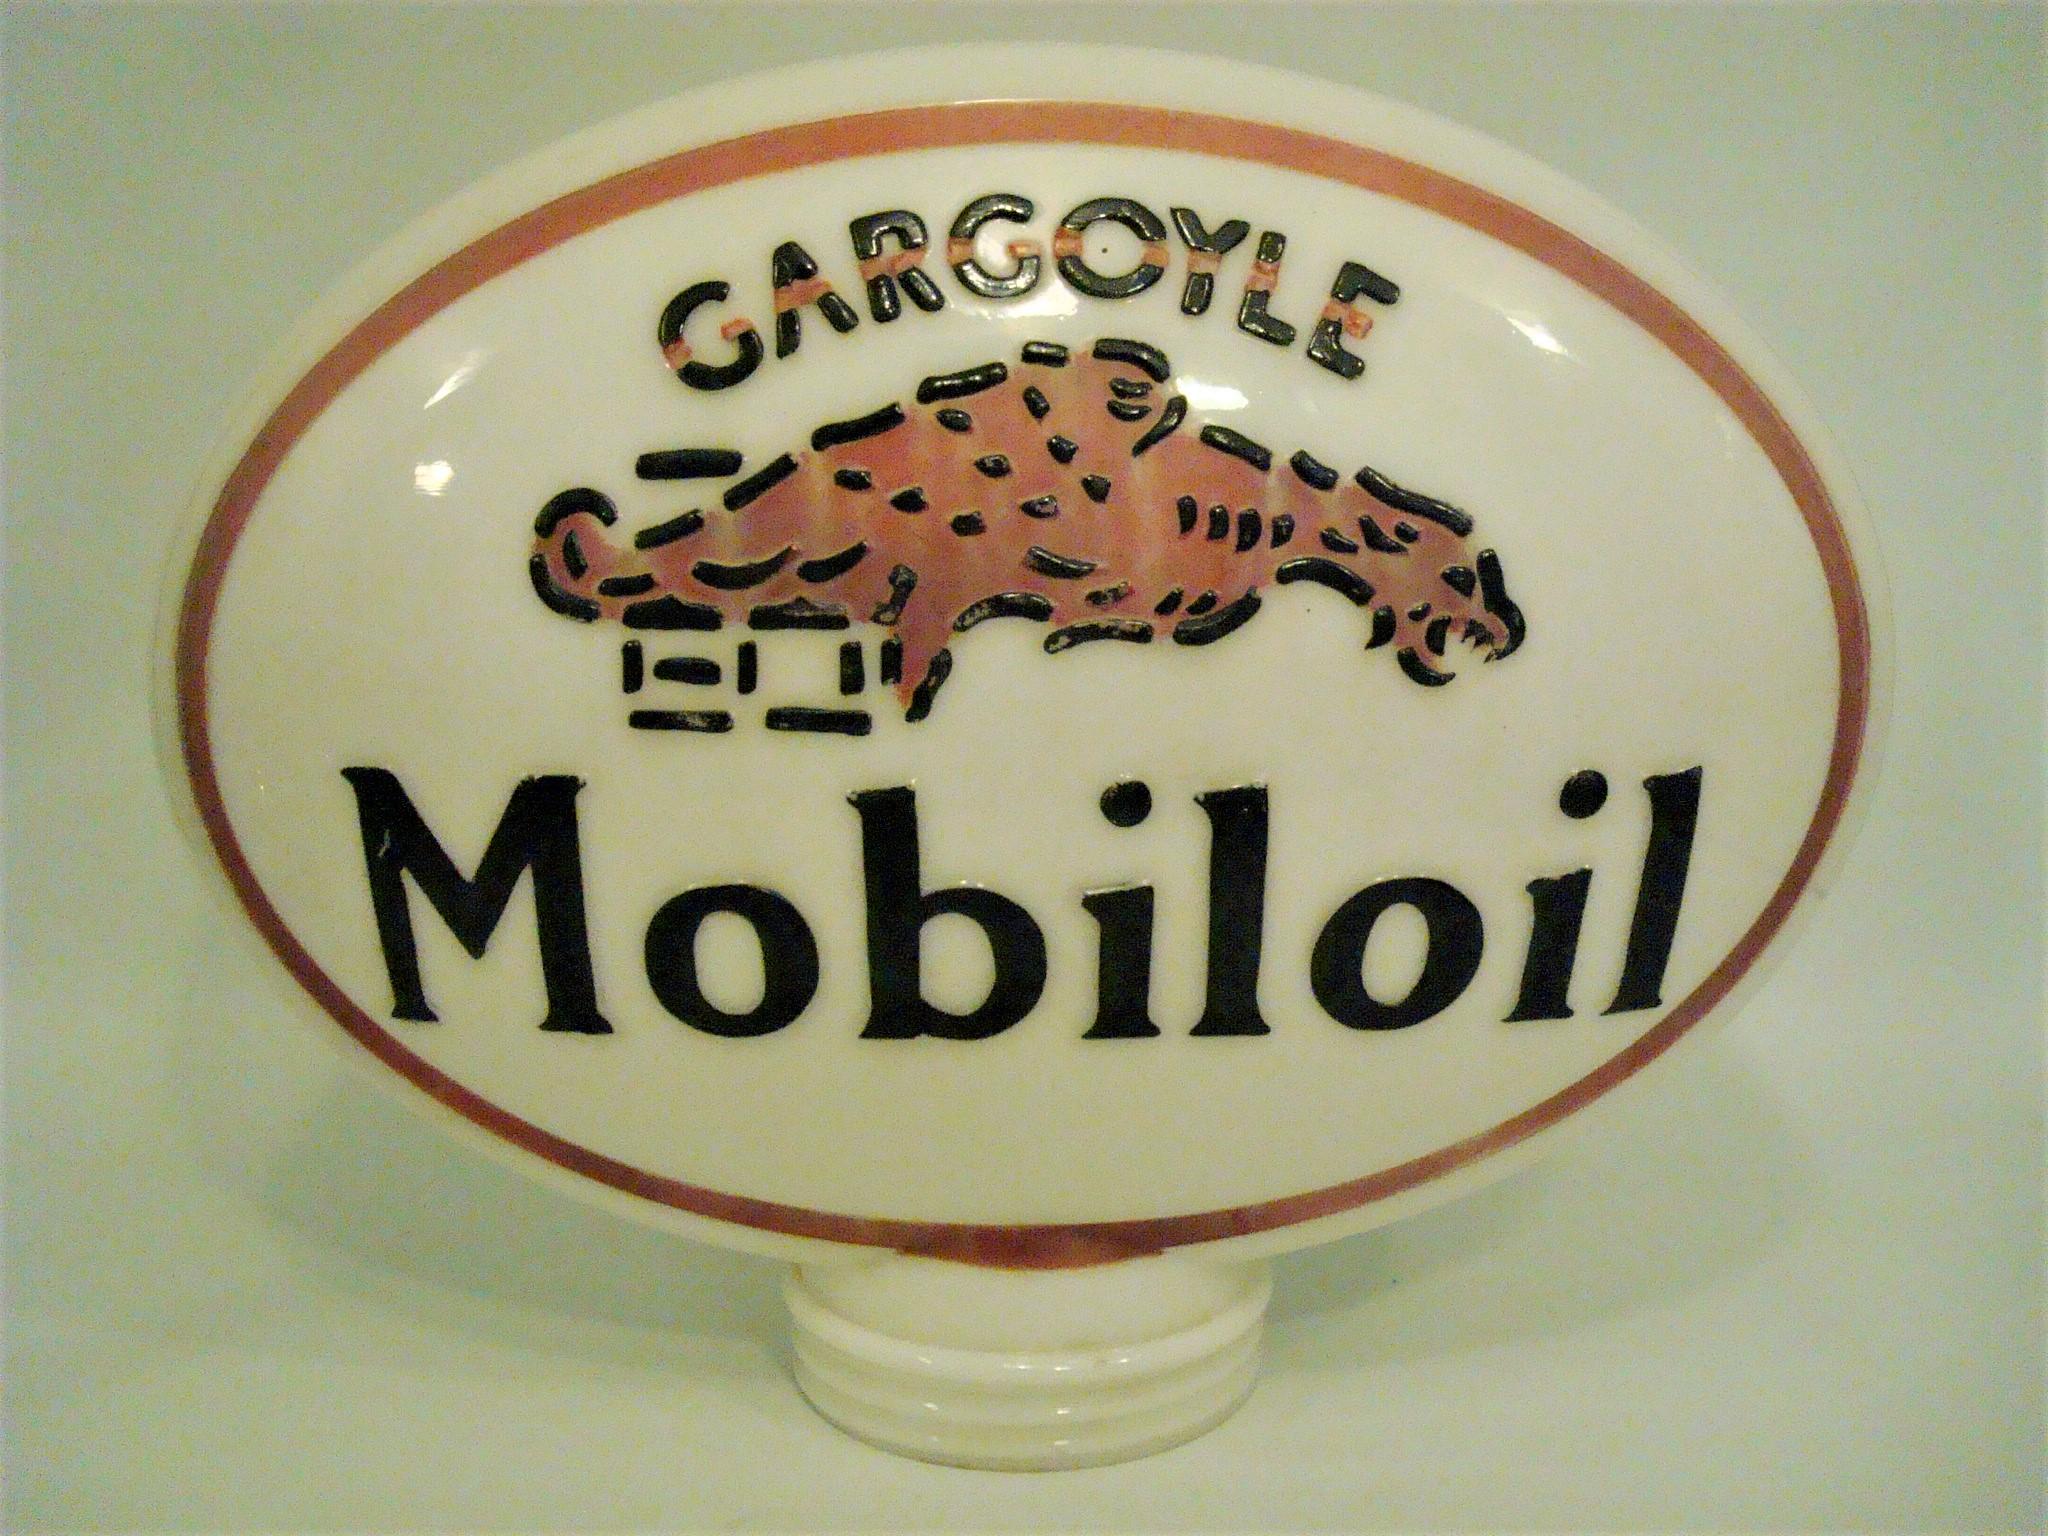 Very Rarer Mobiloil 1-Piece Gargoyle Gas Globe
Stunning all original Mobiloil Gargoyle Cabinet Globe. This globe has no touchups or repairs or cracks anywhere. You don't find them like this often.
Perfect Gift for any collector : Gas / Oil /